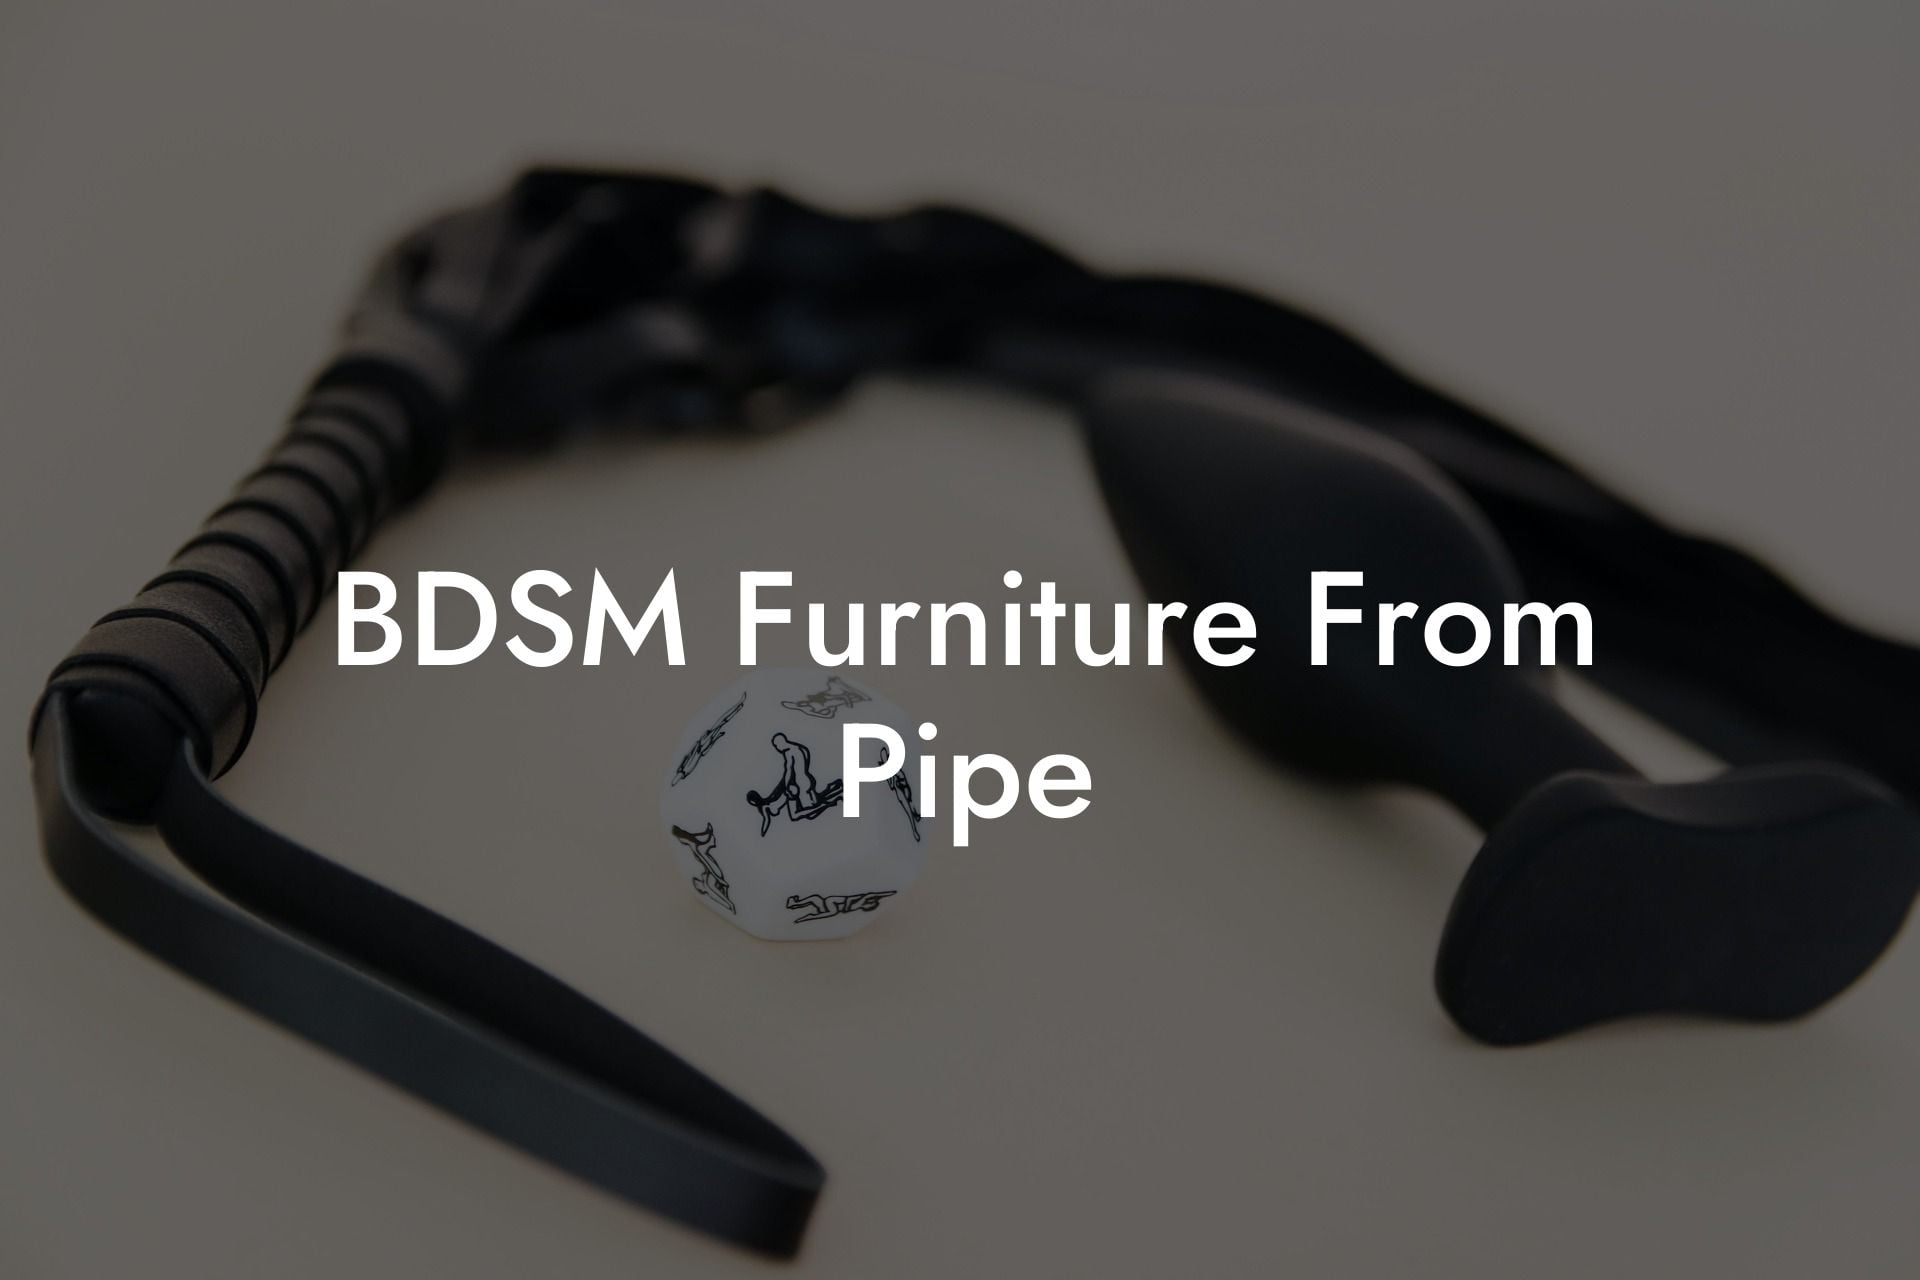 BDSM Furniture From Pipe